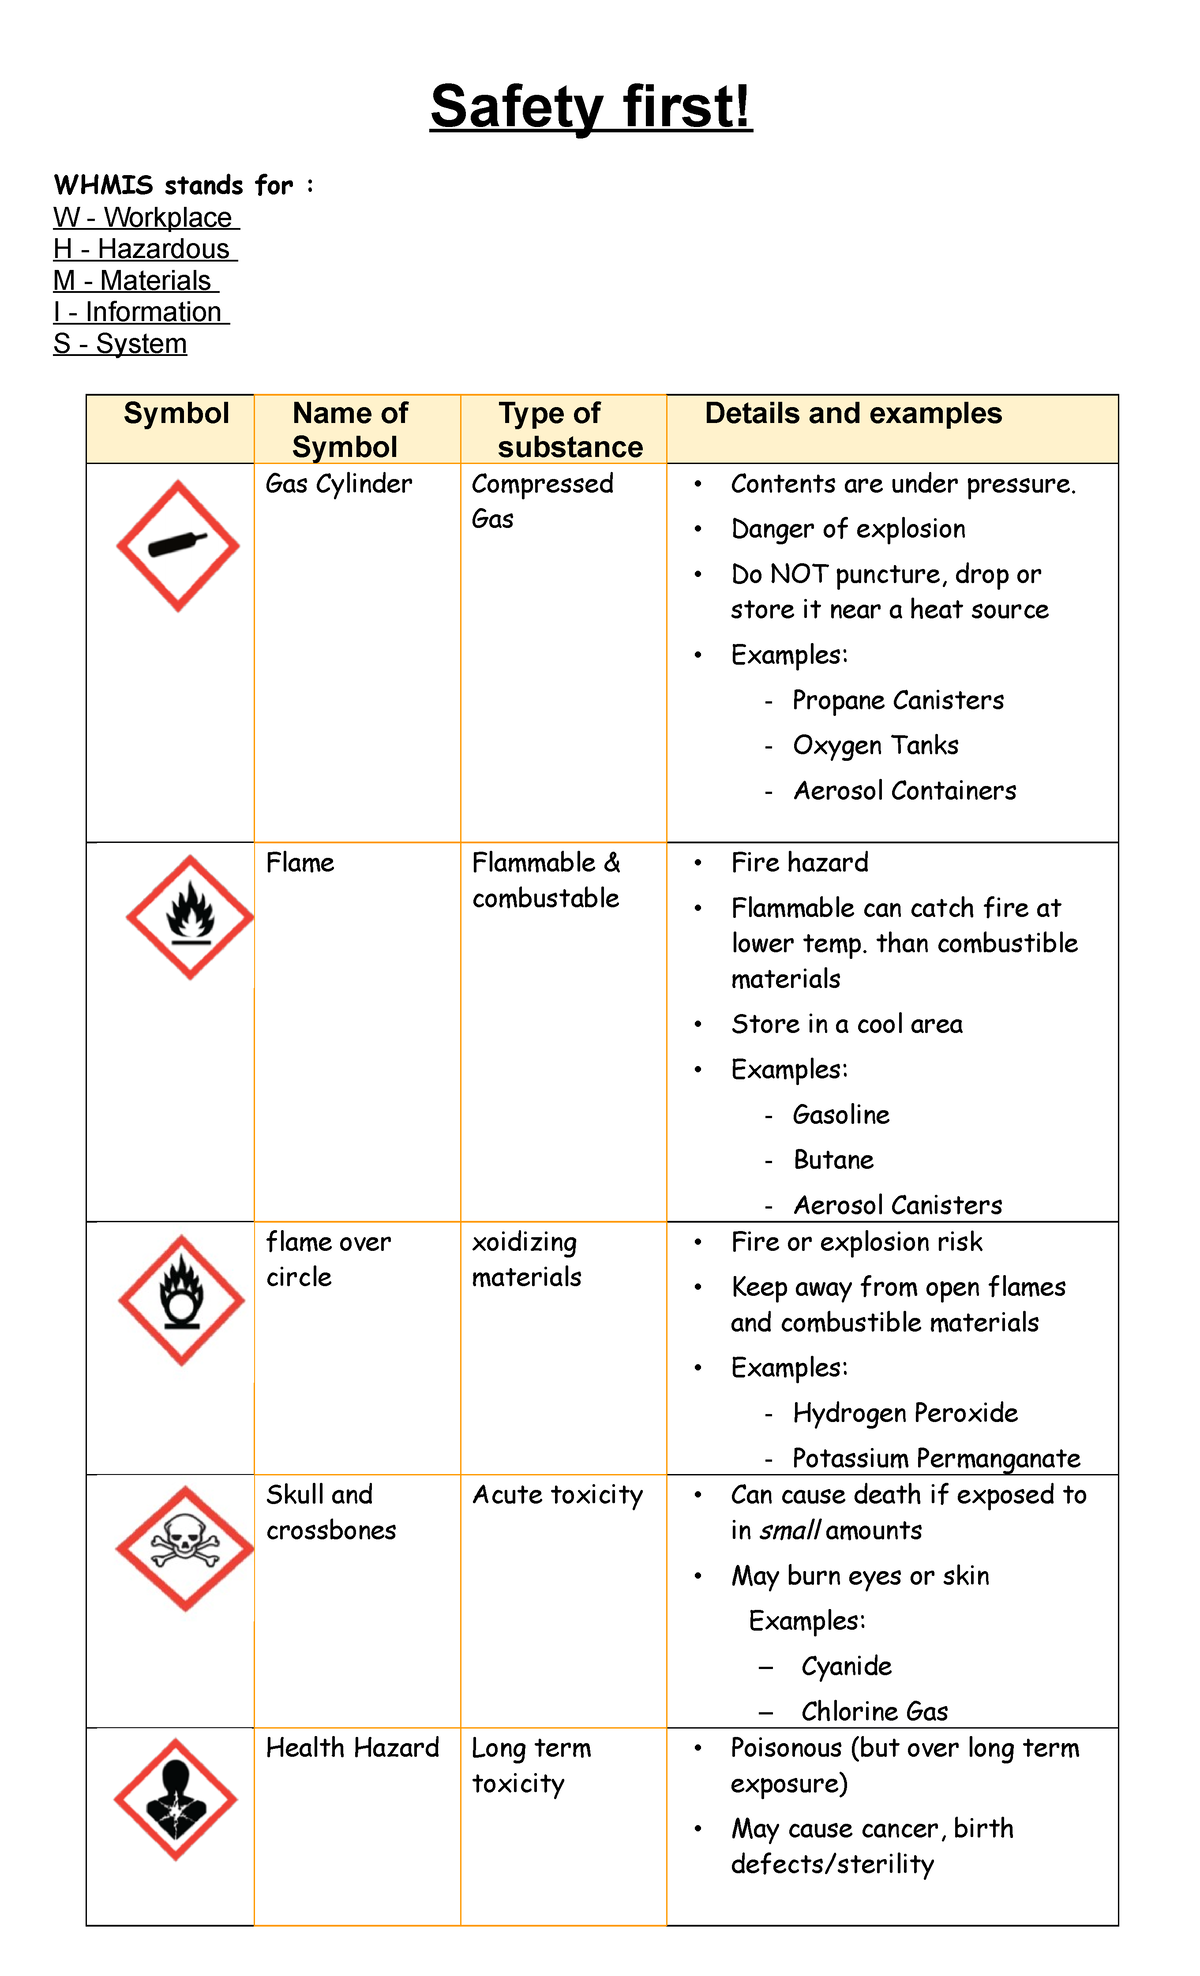 Safety and Whmis handout - Studocu